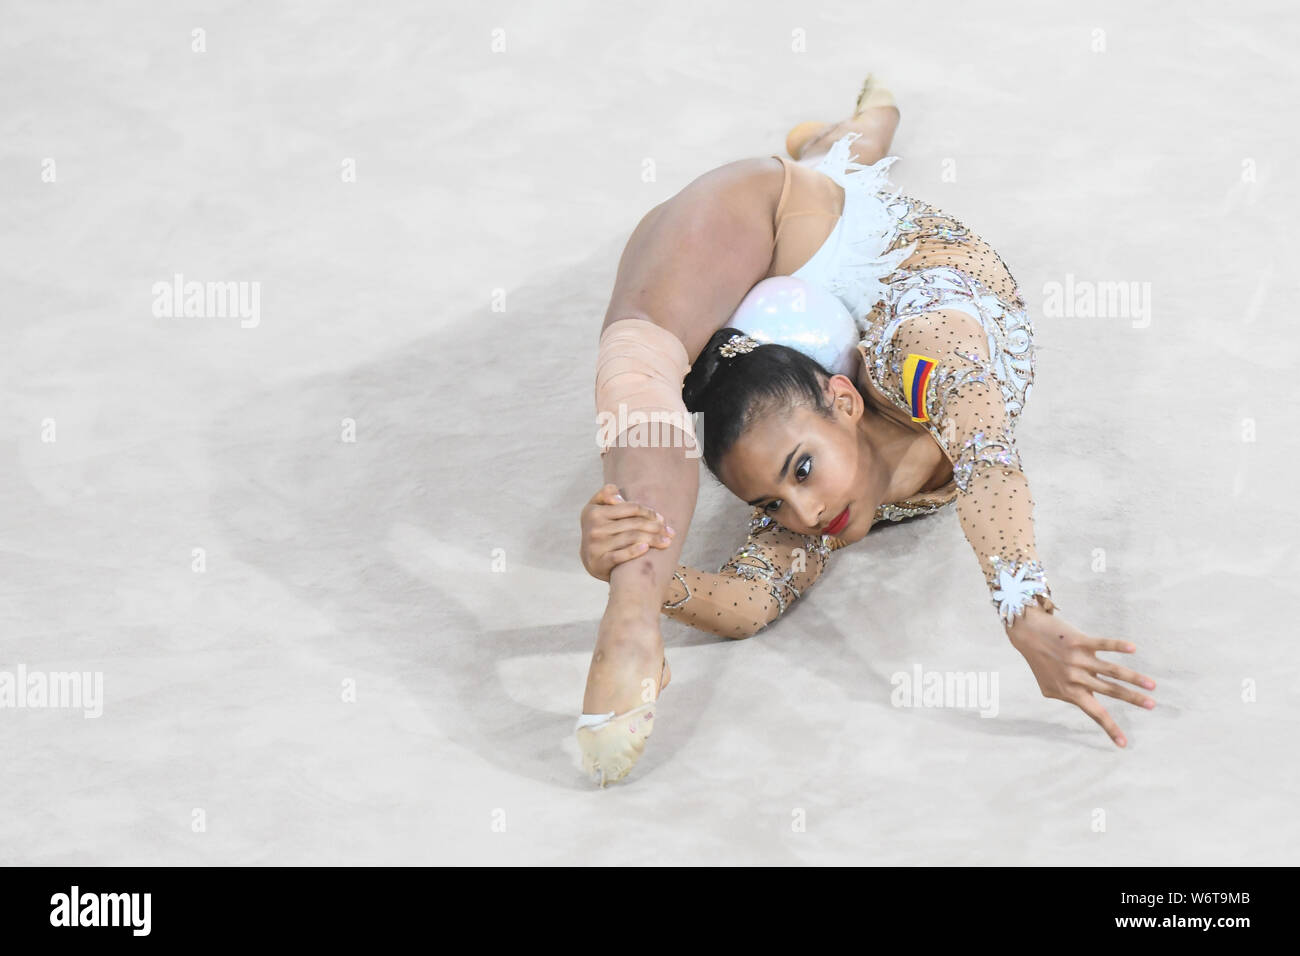 Lima, Peru. 2nd Aug, 2019. ORIANA VINAS from Colombia competes in the individual All-Around with the ball during the competition held in the Polideportivo Villa El Salvador in Lima, Peru. Credit: Amy Sanderson/ZUMA Wire/Alamy Live News Stock Photo